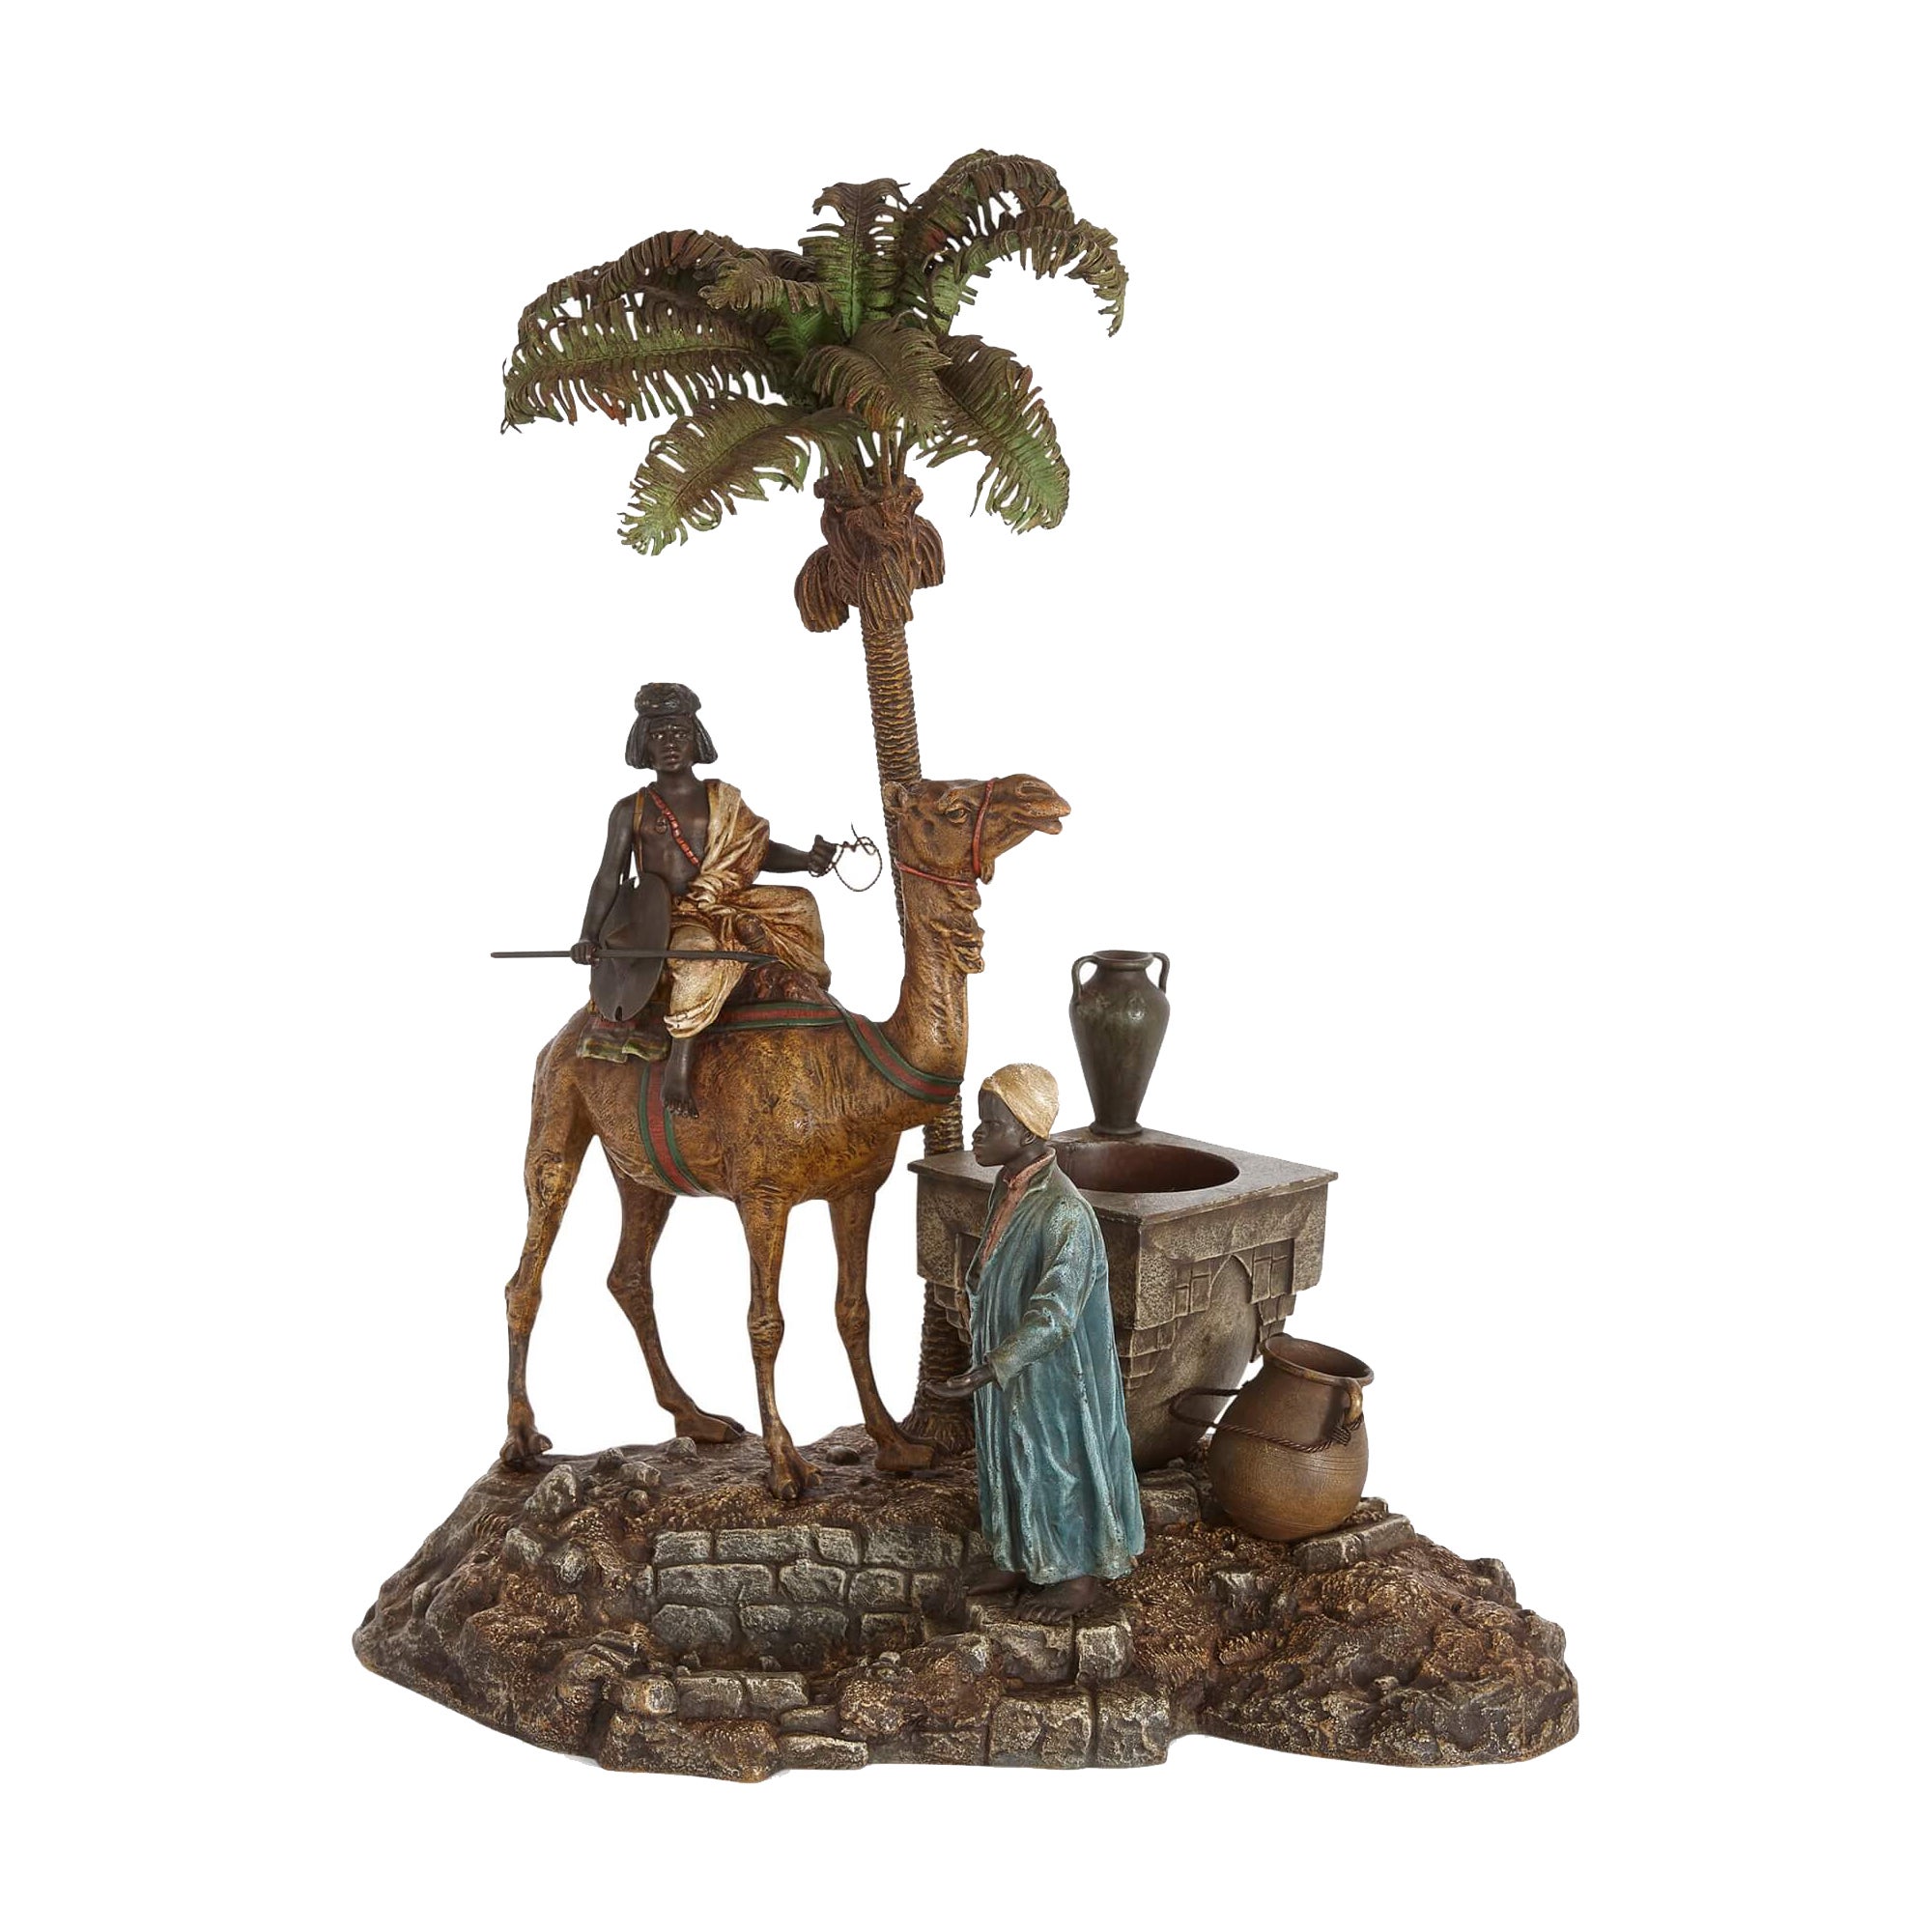 Antique Viennese Cold-Painted Bronze Sculpture with a Camel by Bergman